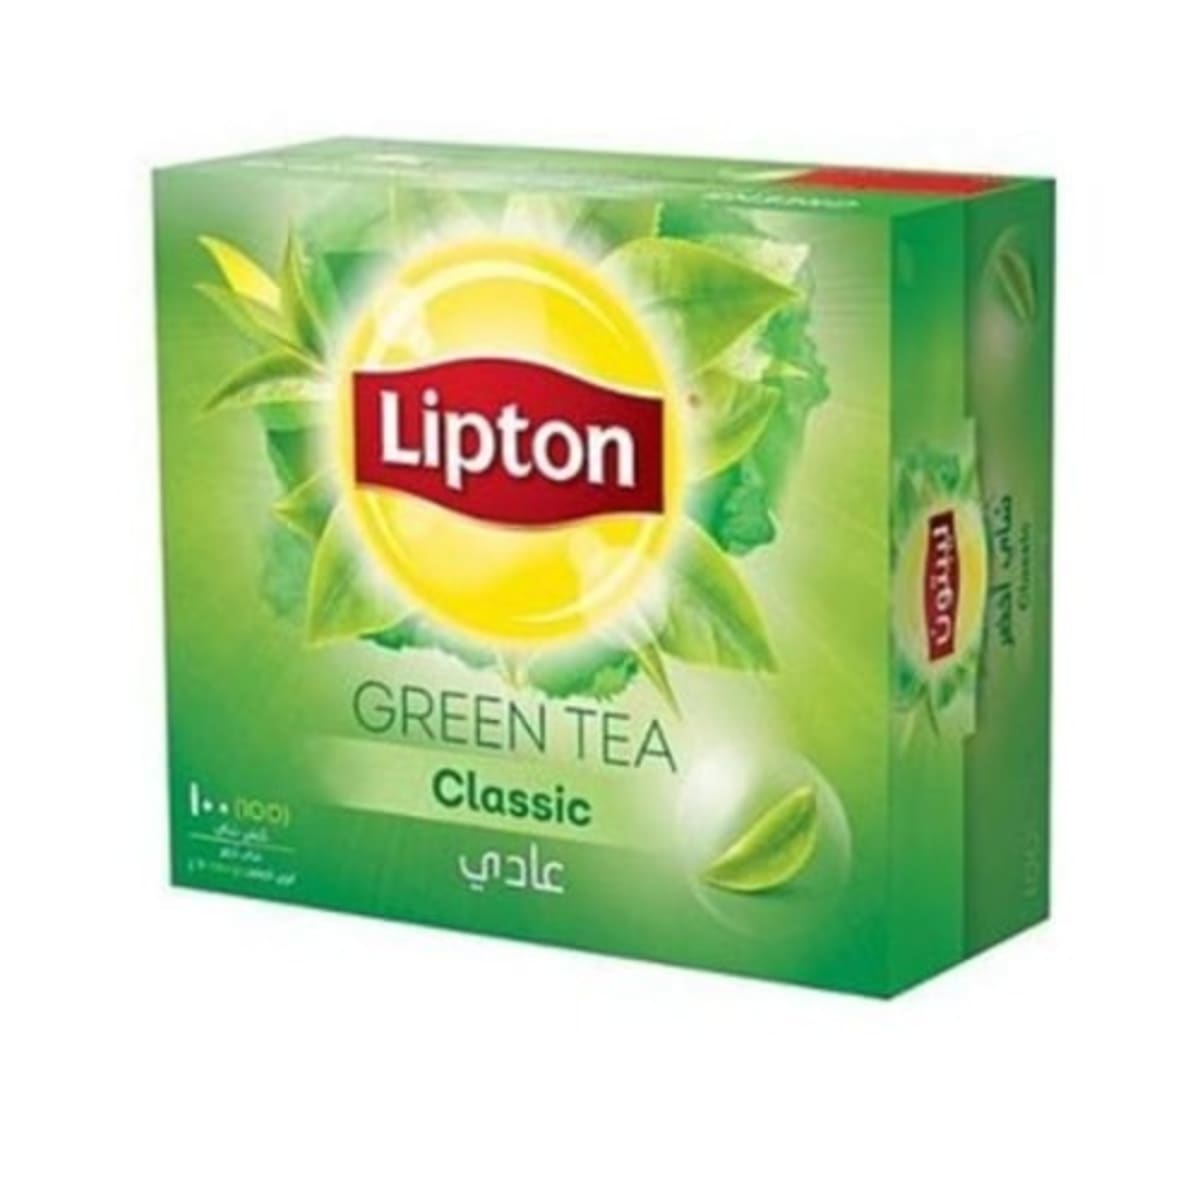 Lipton Tulsi Natura Green Tea Bags, 25 Count Price, Uses, Side Effects,  Composition - Apollo Pharmacy